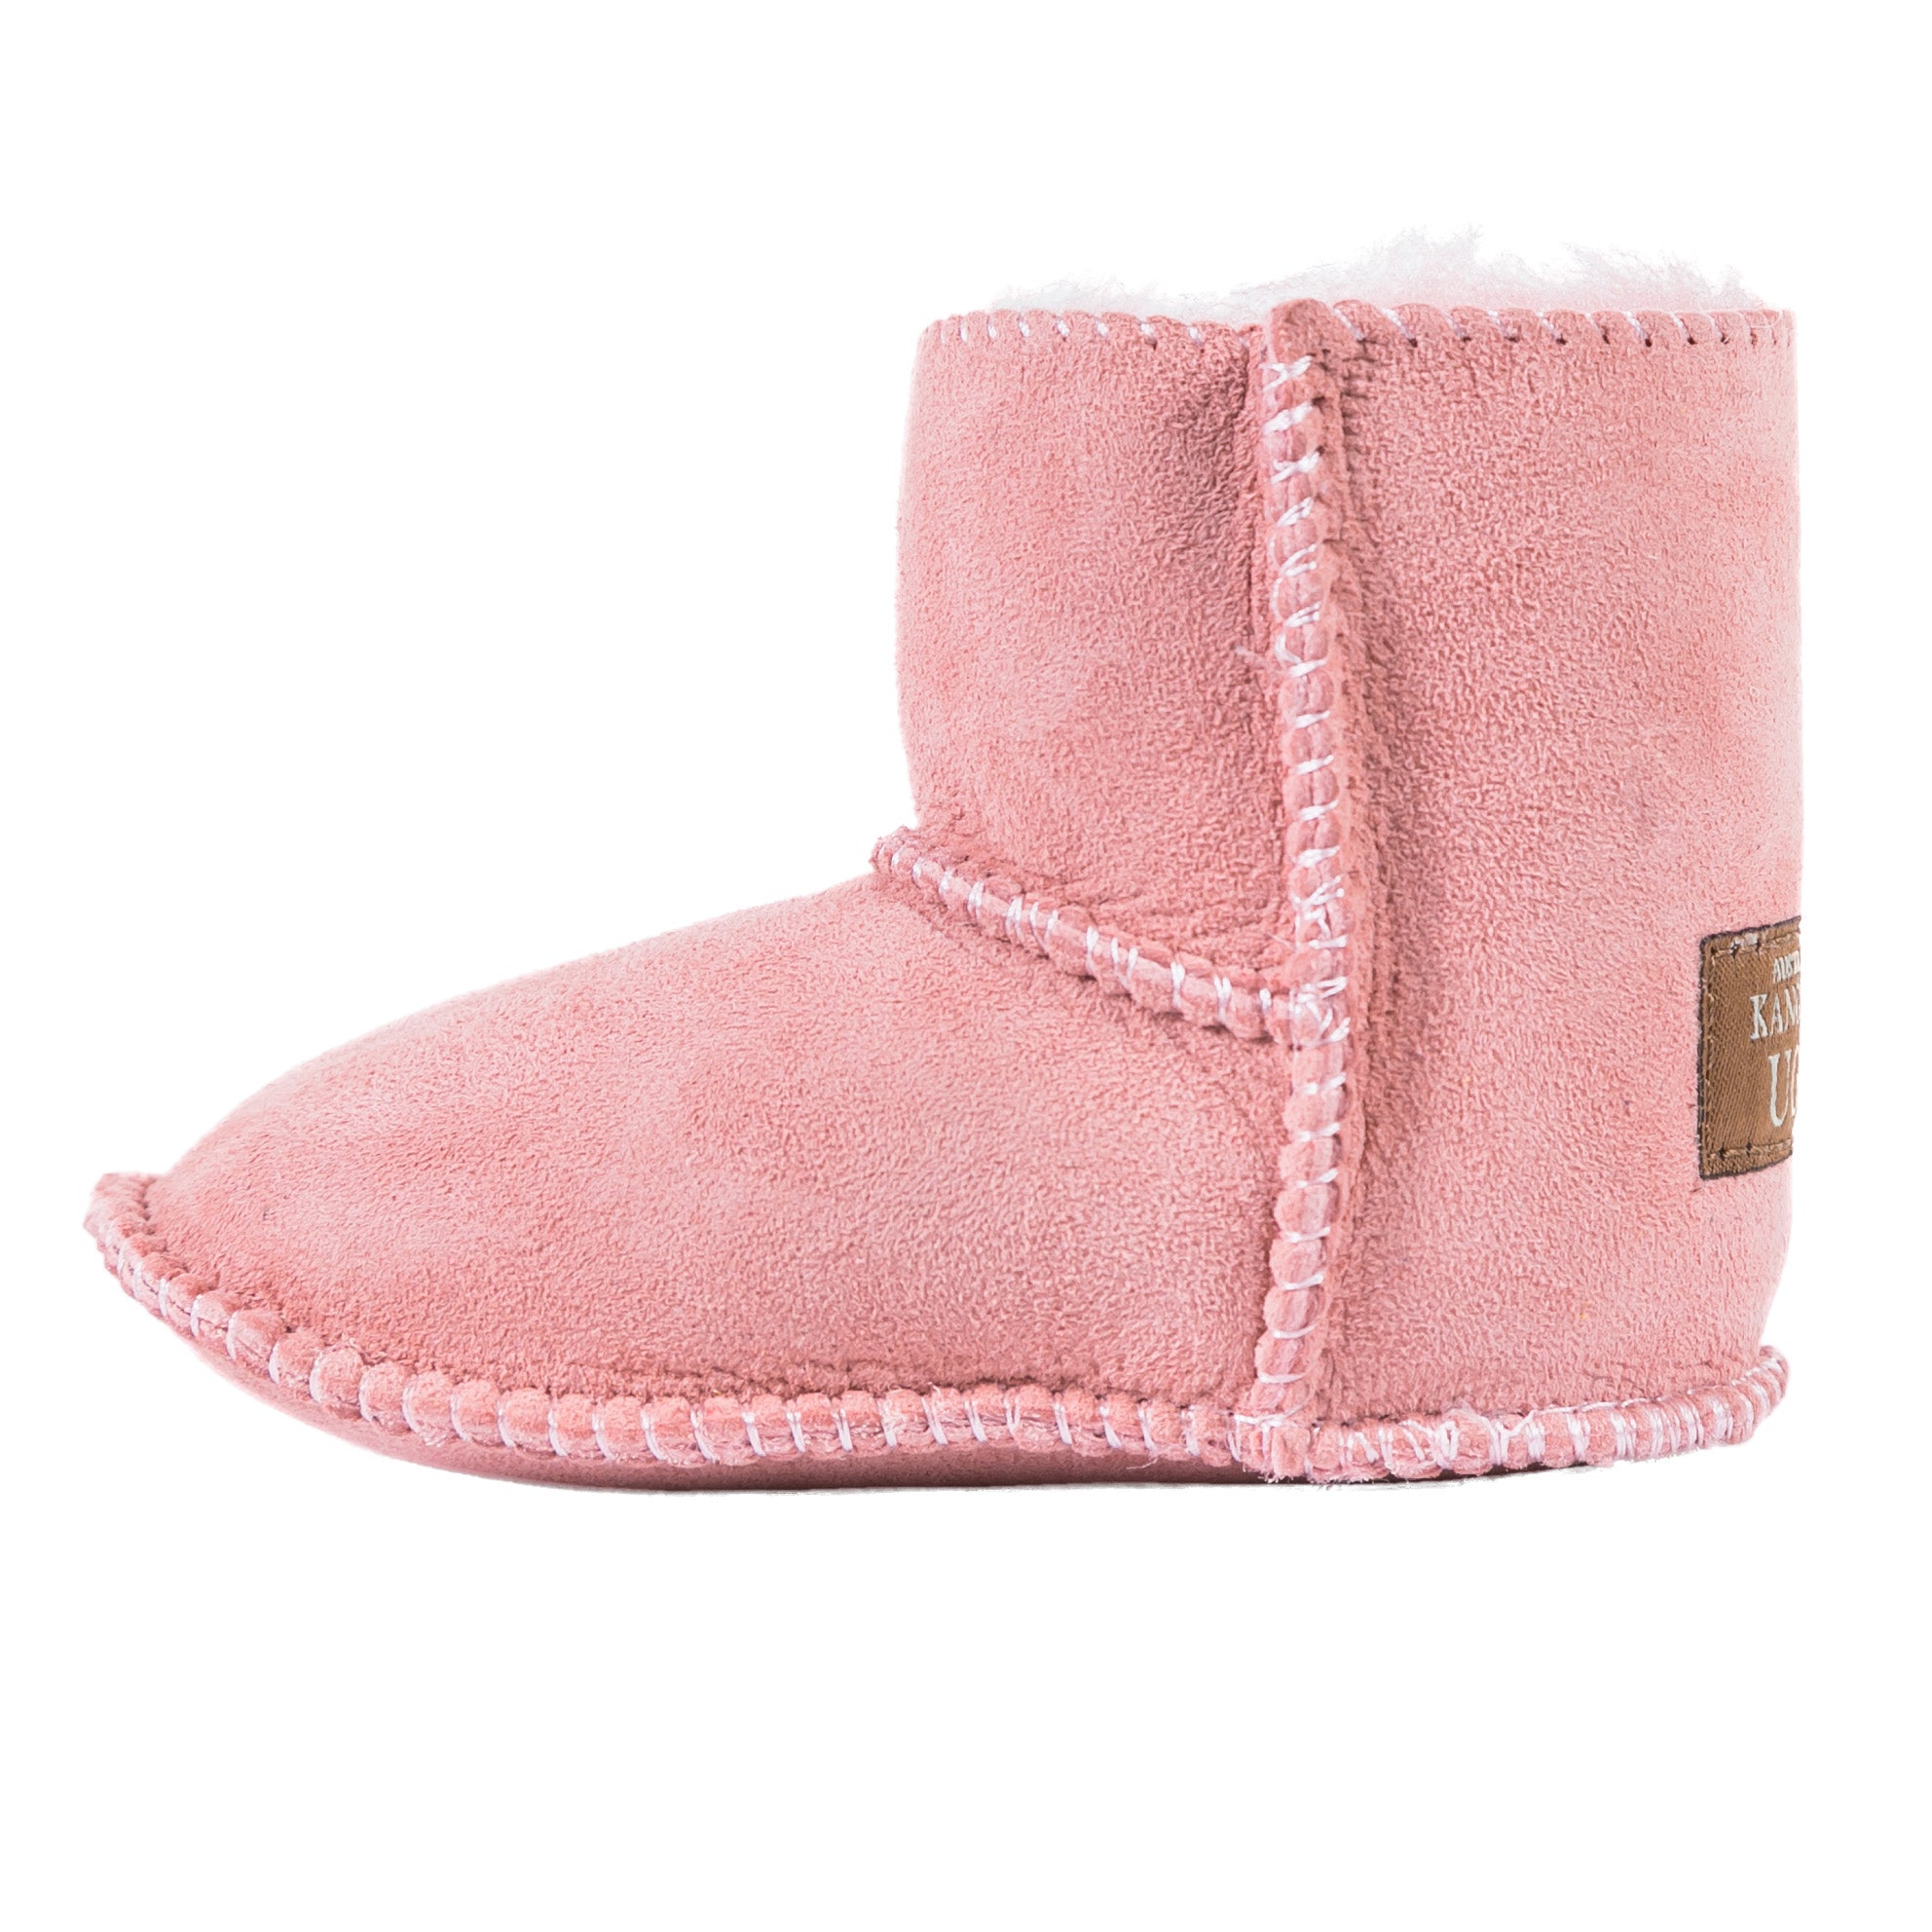 baby ugg boots pink